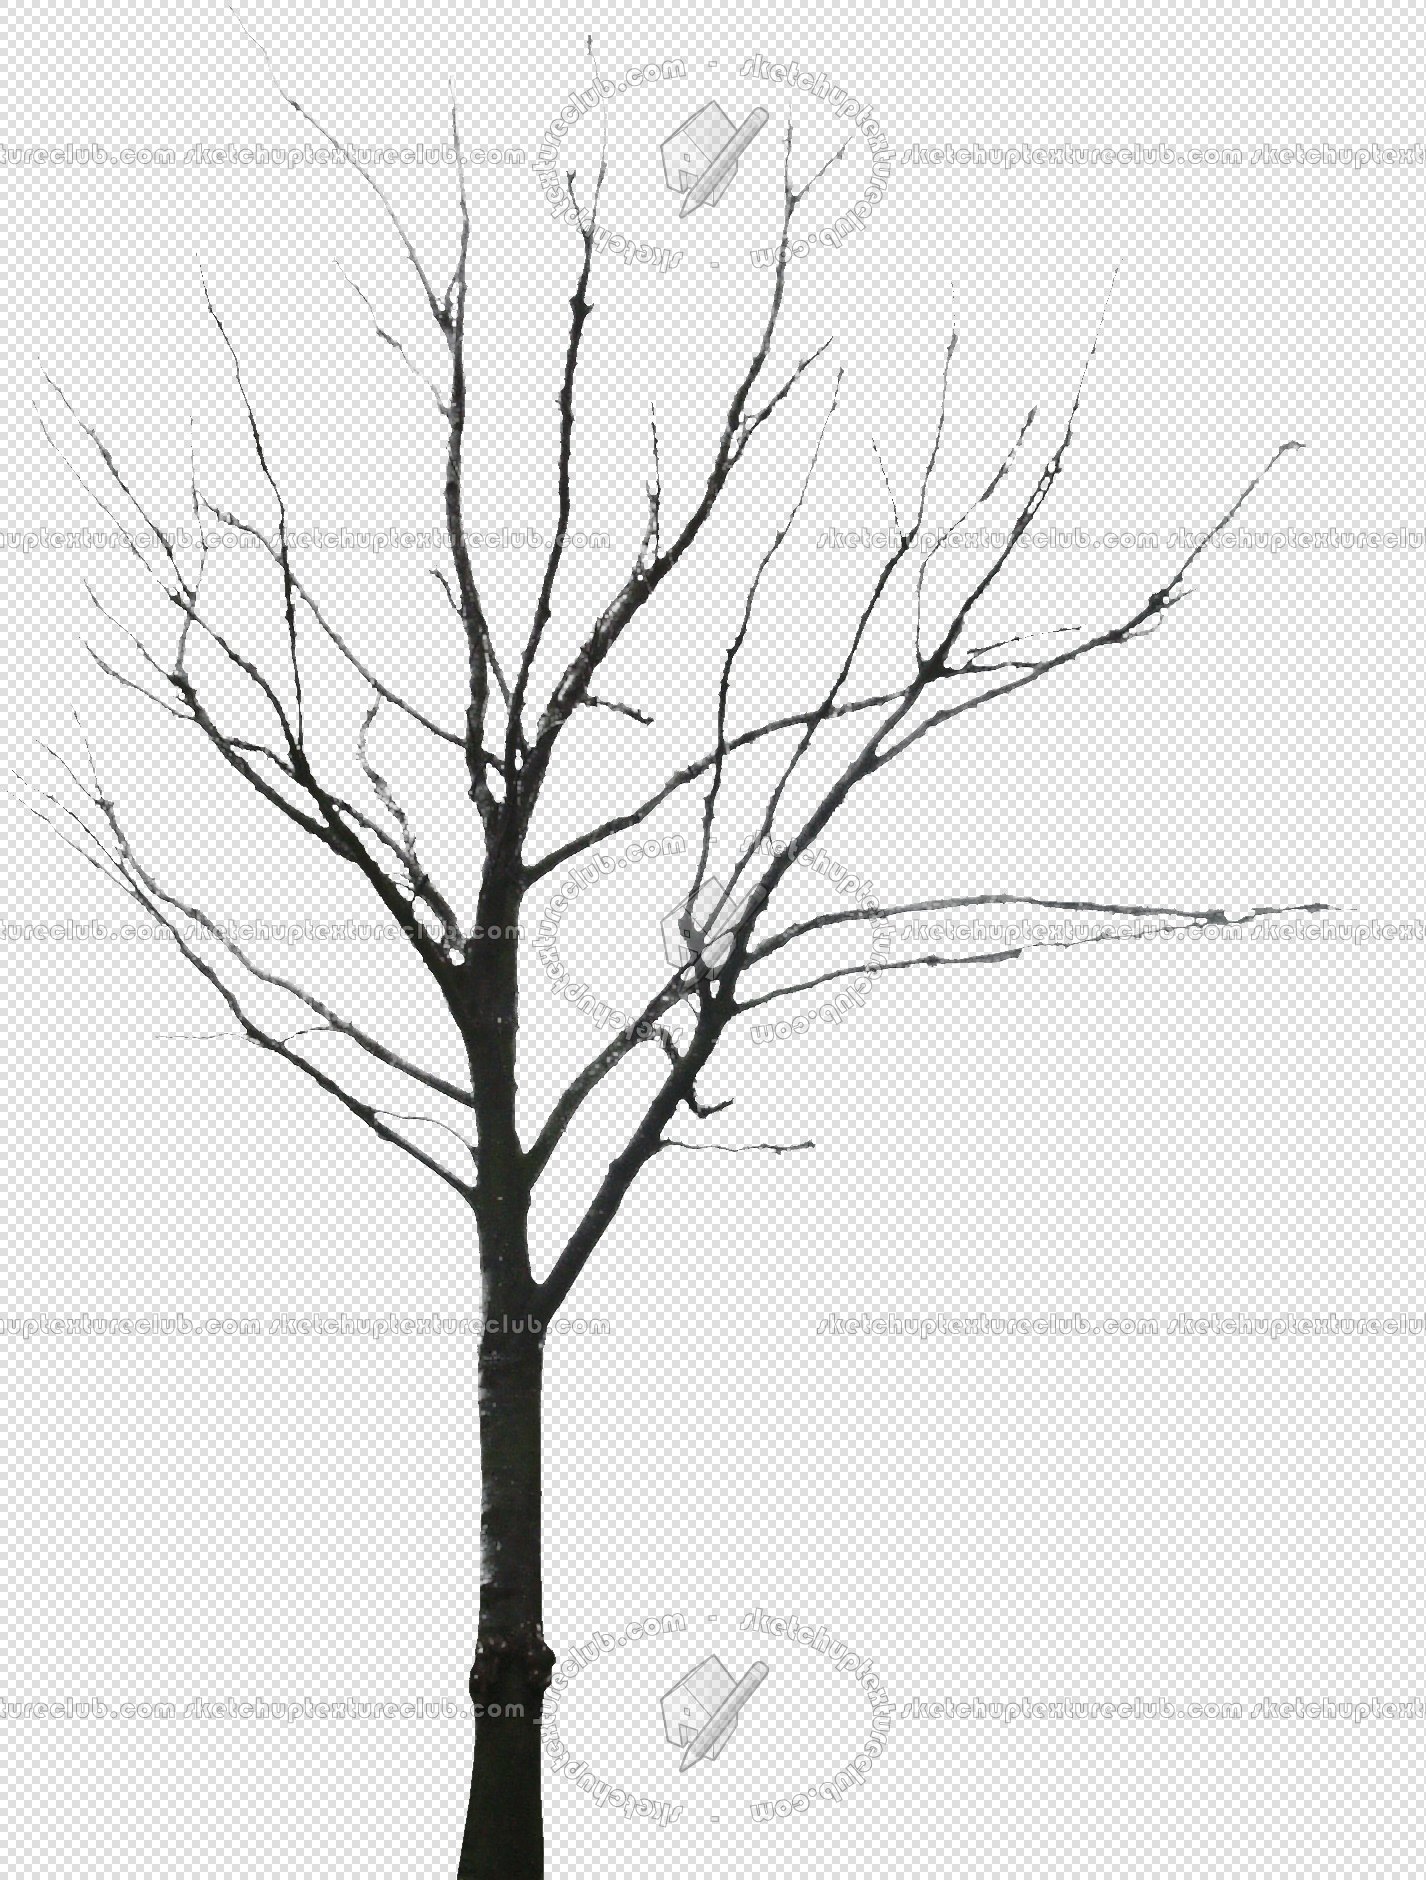 Packs - CUT OUT - Vegetation - Trees - CUT OUT WINTER TREES PACK 2 00039